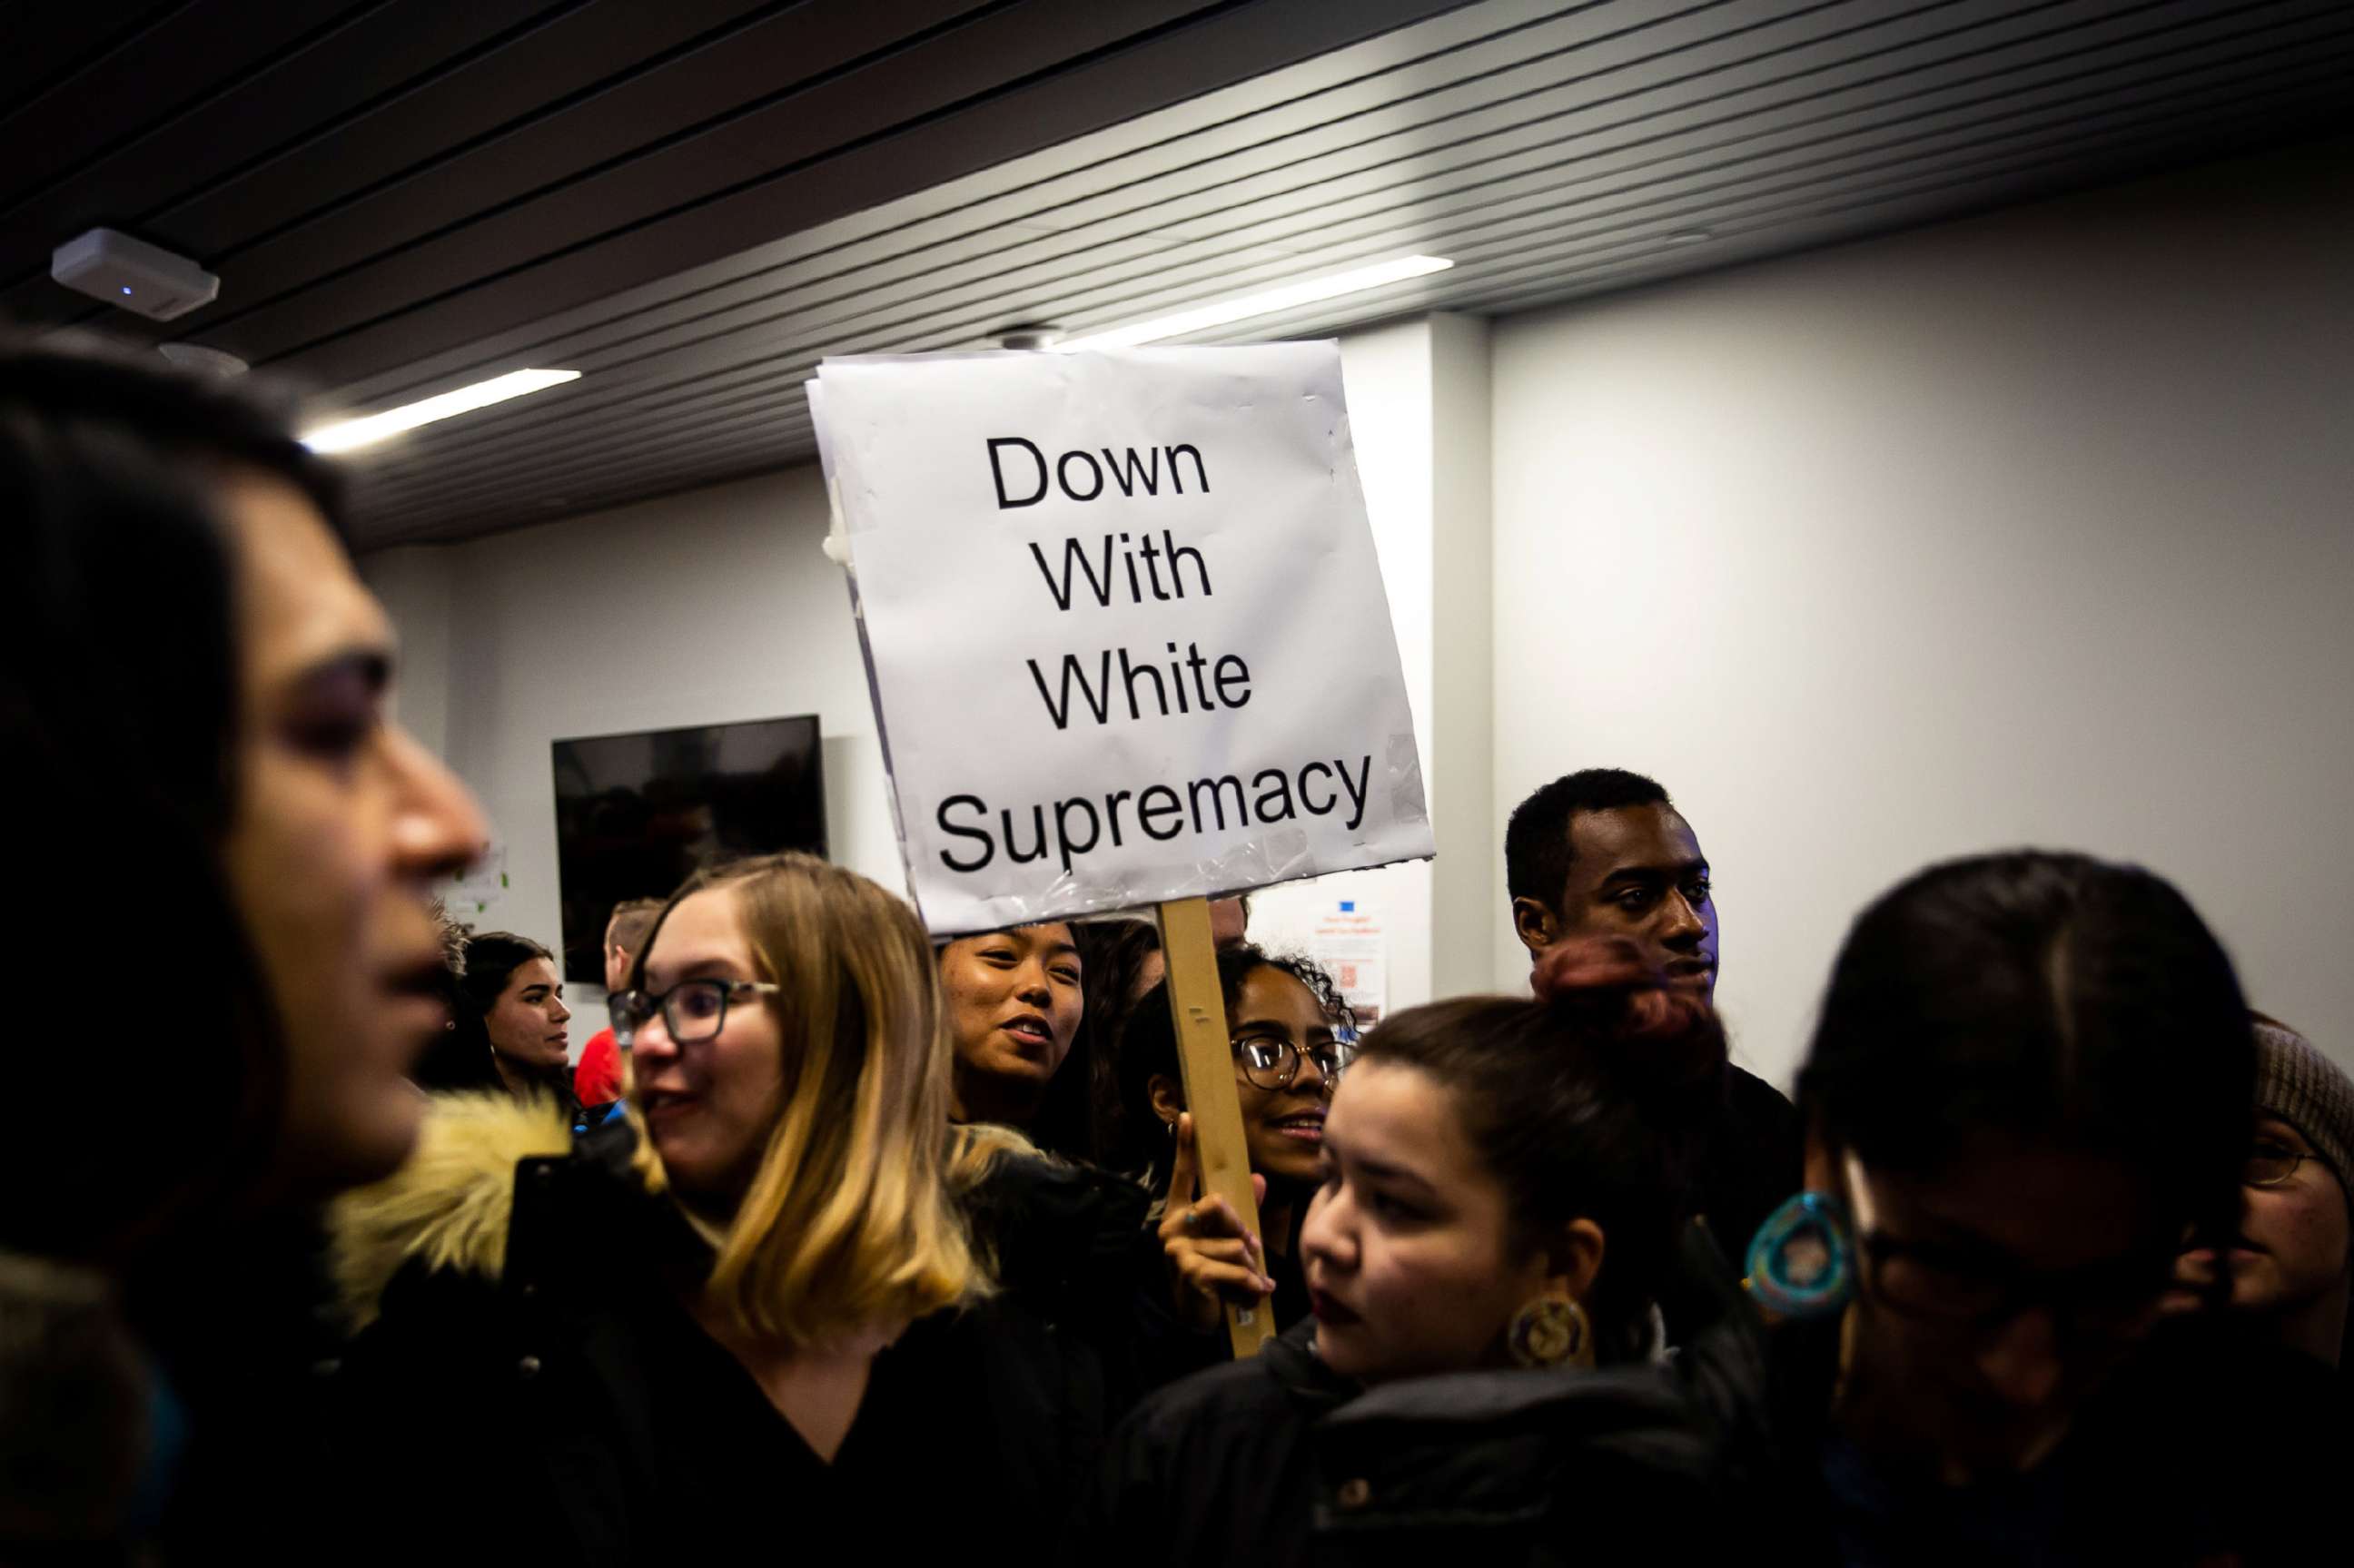 PHOTO: Students rally against white supremacy at Syracuse University in Syracuse, N.Y., Nov. 20, 2019.